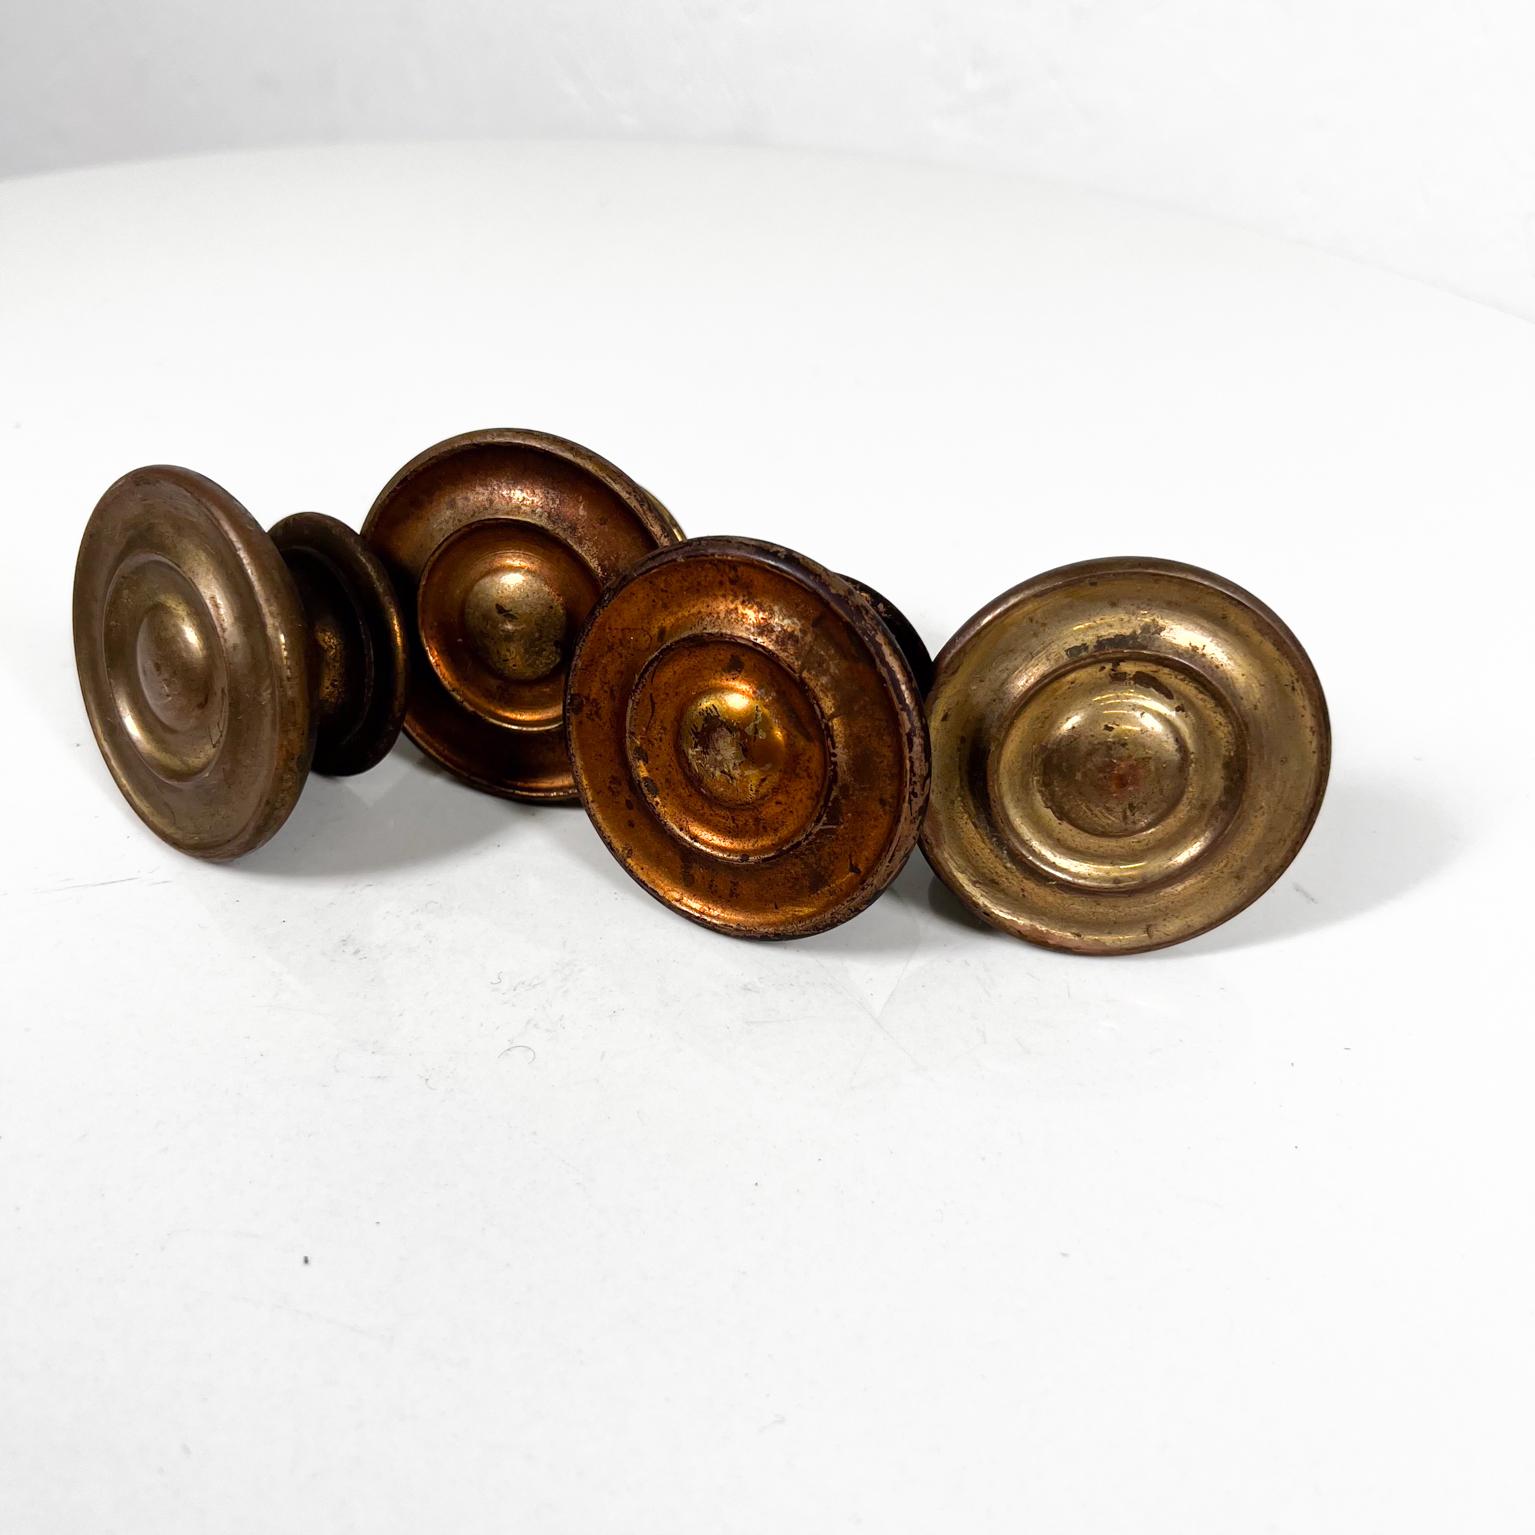 1930s Decorative Vintage Hardware Four Bronze Pulls Knobs
2 diameter x 1 d
Refer to all images.